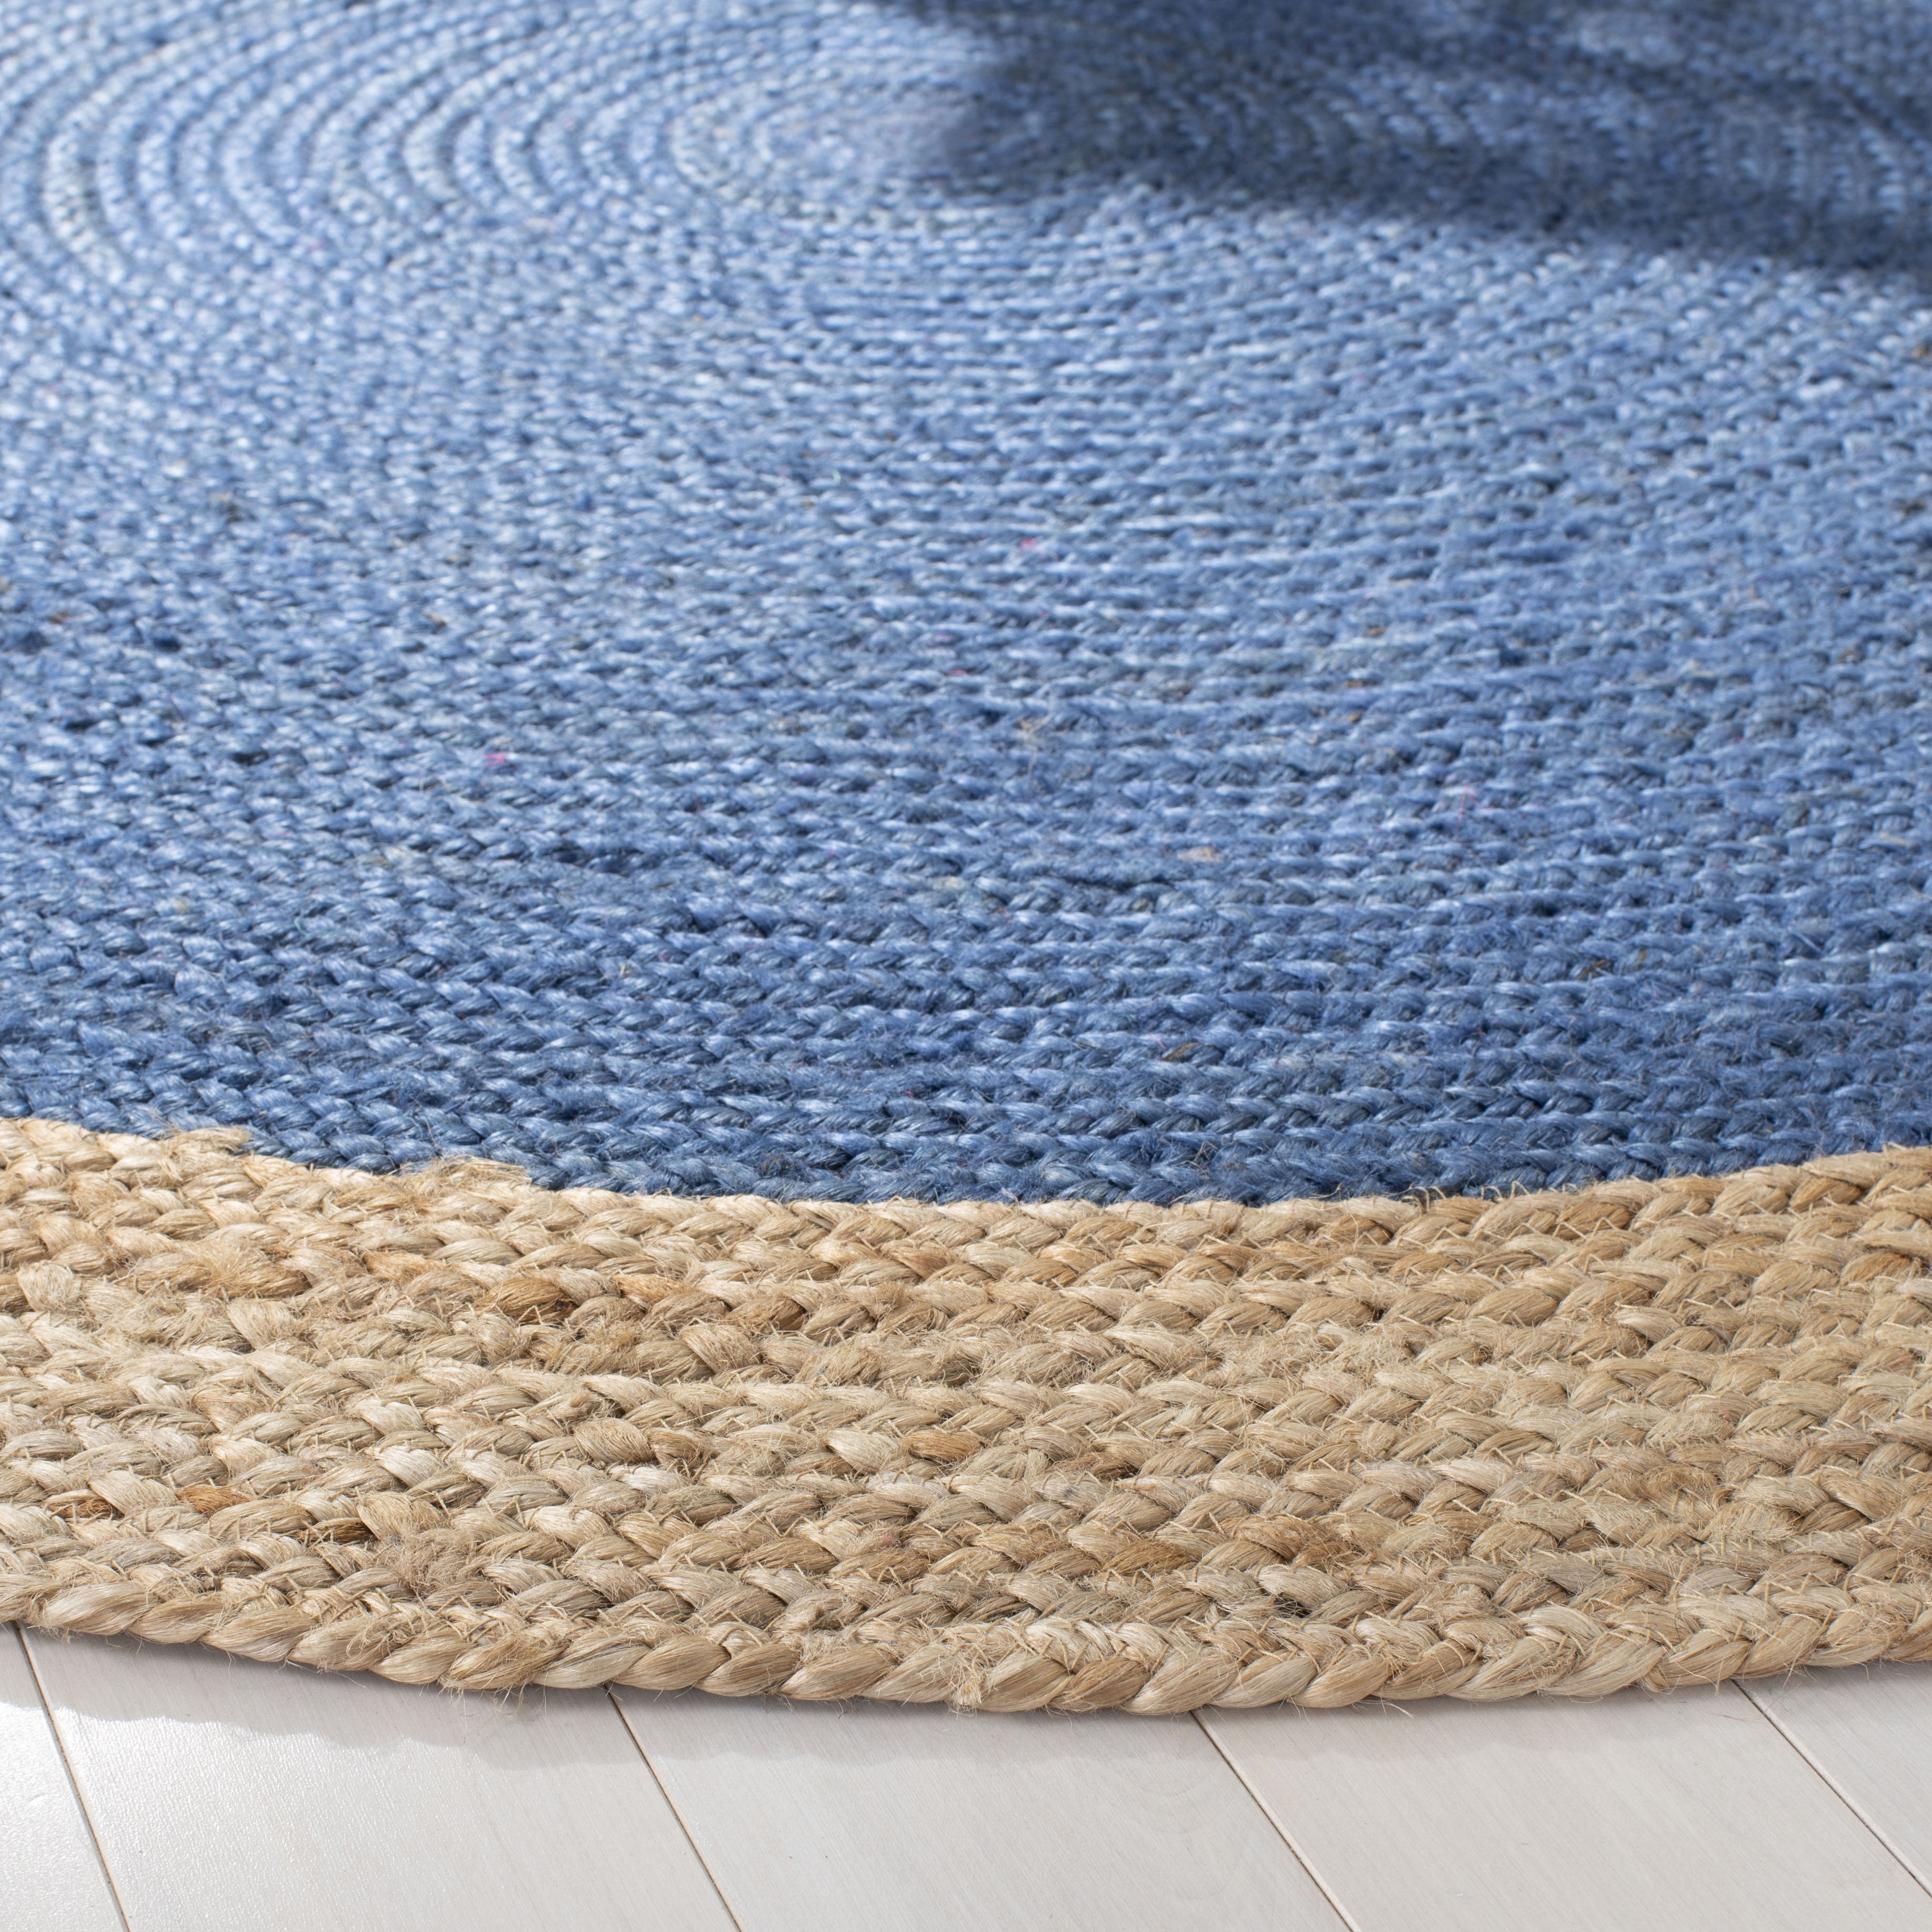 Arlo Home Hand Woven Area Rug, NF801D, Royal Blue/Natural,  8' X 8' Round - Image 2